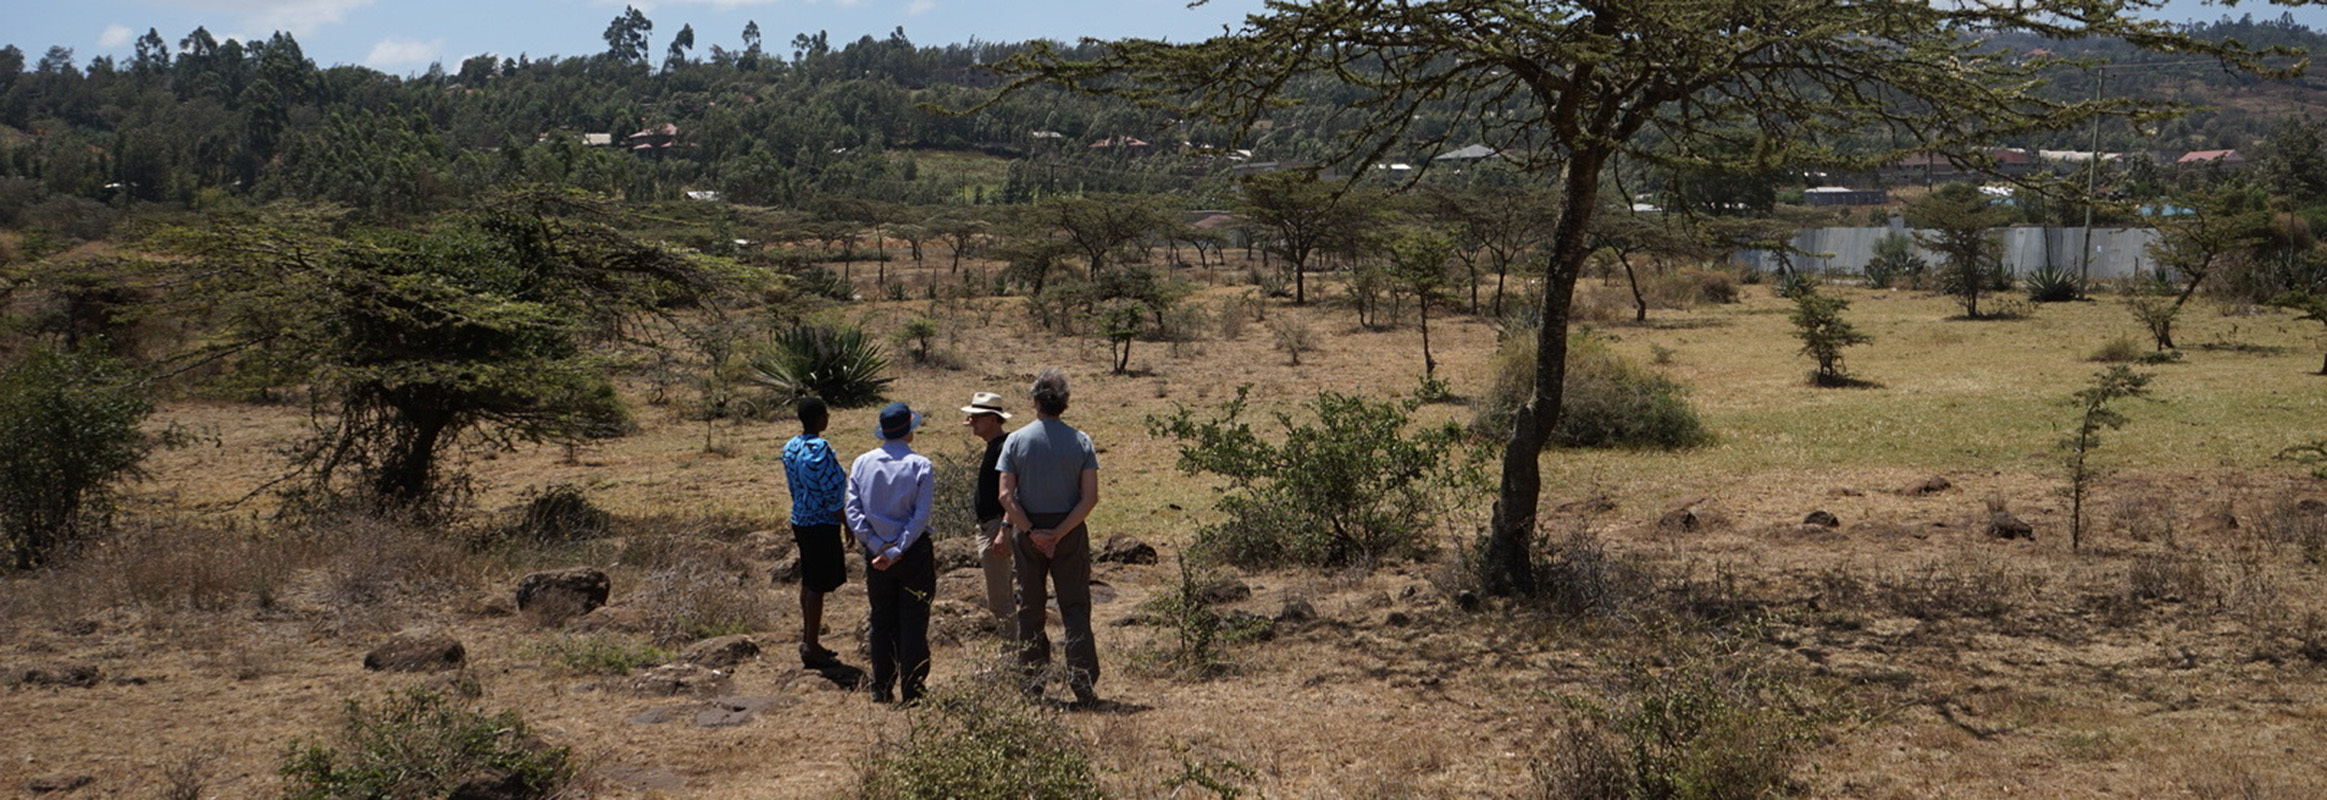 Three individuals standing in a dry, open landscape, observing the terrain for the potential installation of a new water well, illustrating WellBoring's hands-on approach to providing sustainable water solutions in rural regions.